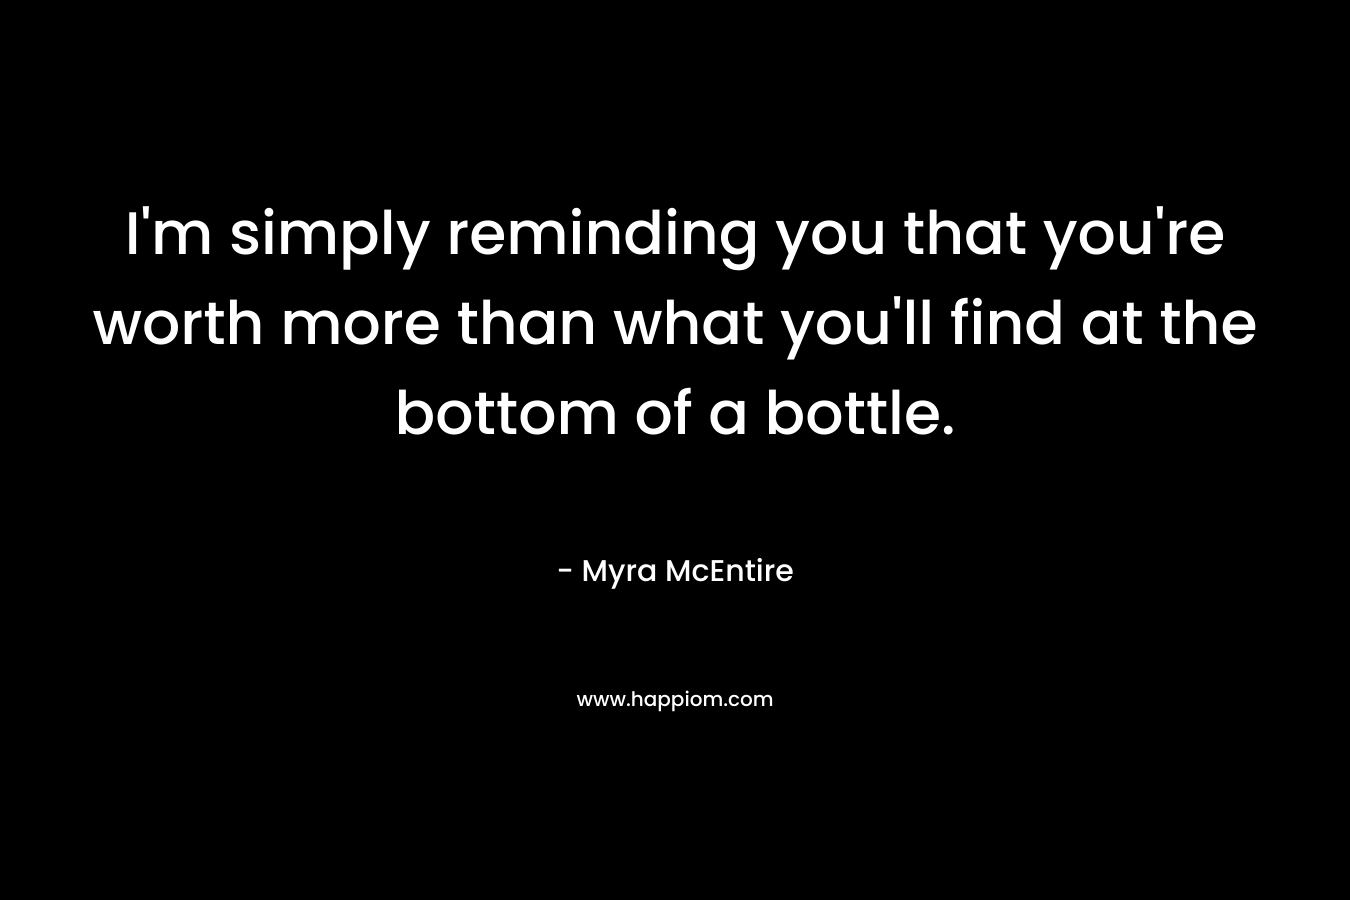 I'm simply reminding you that you're worth more than what you'll find at the bottom of a bottle.